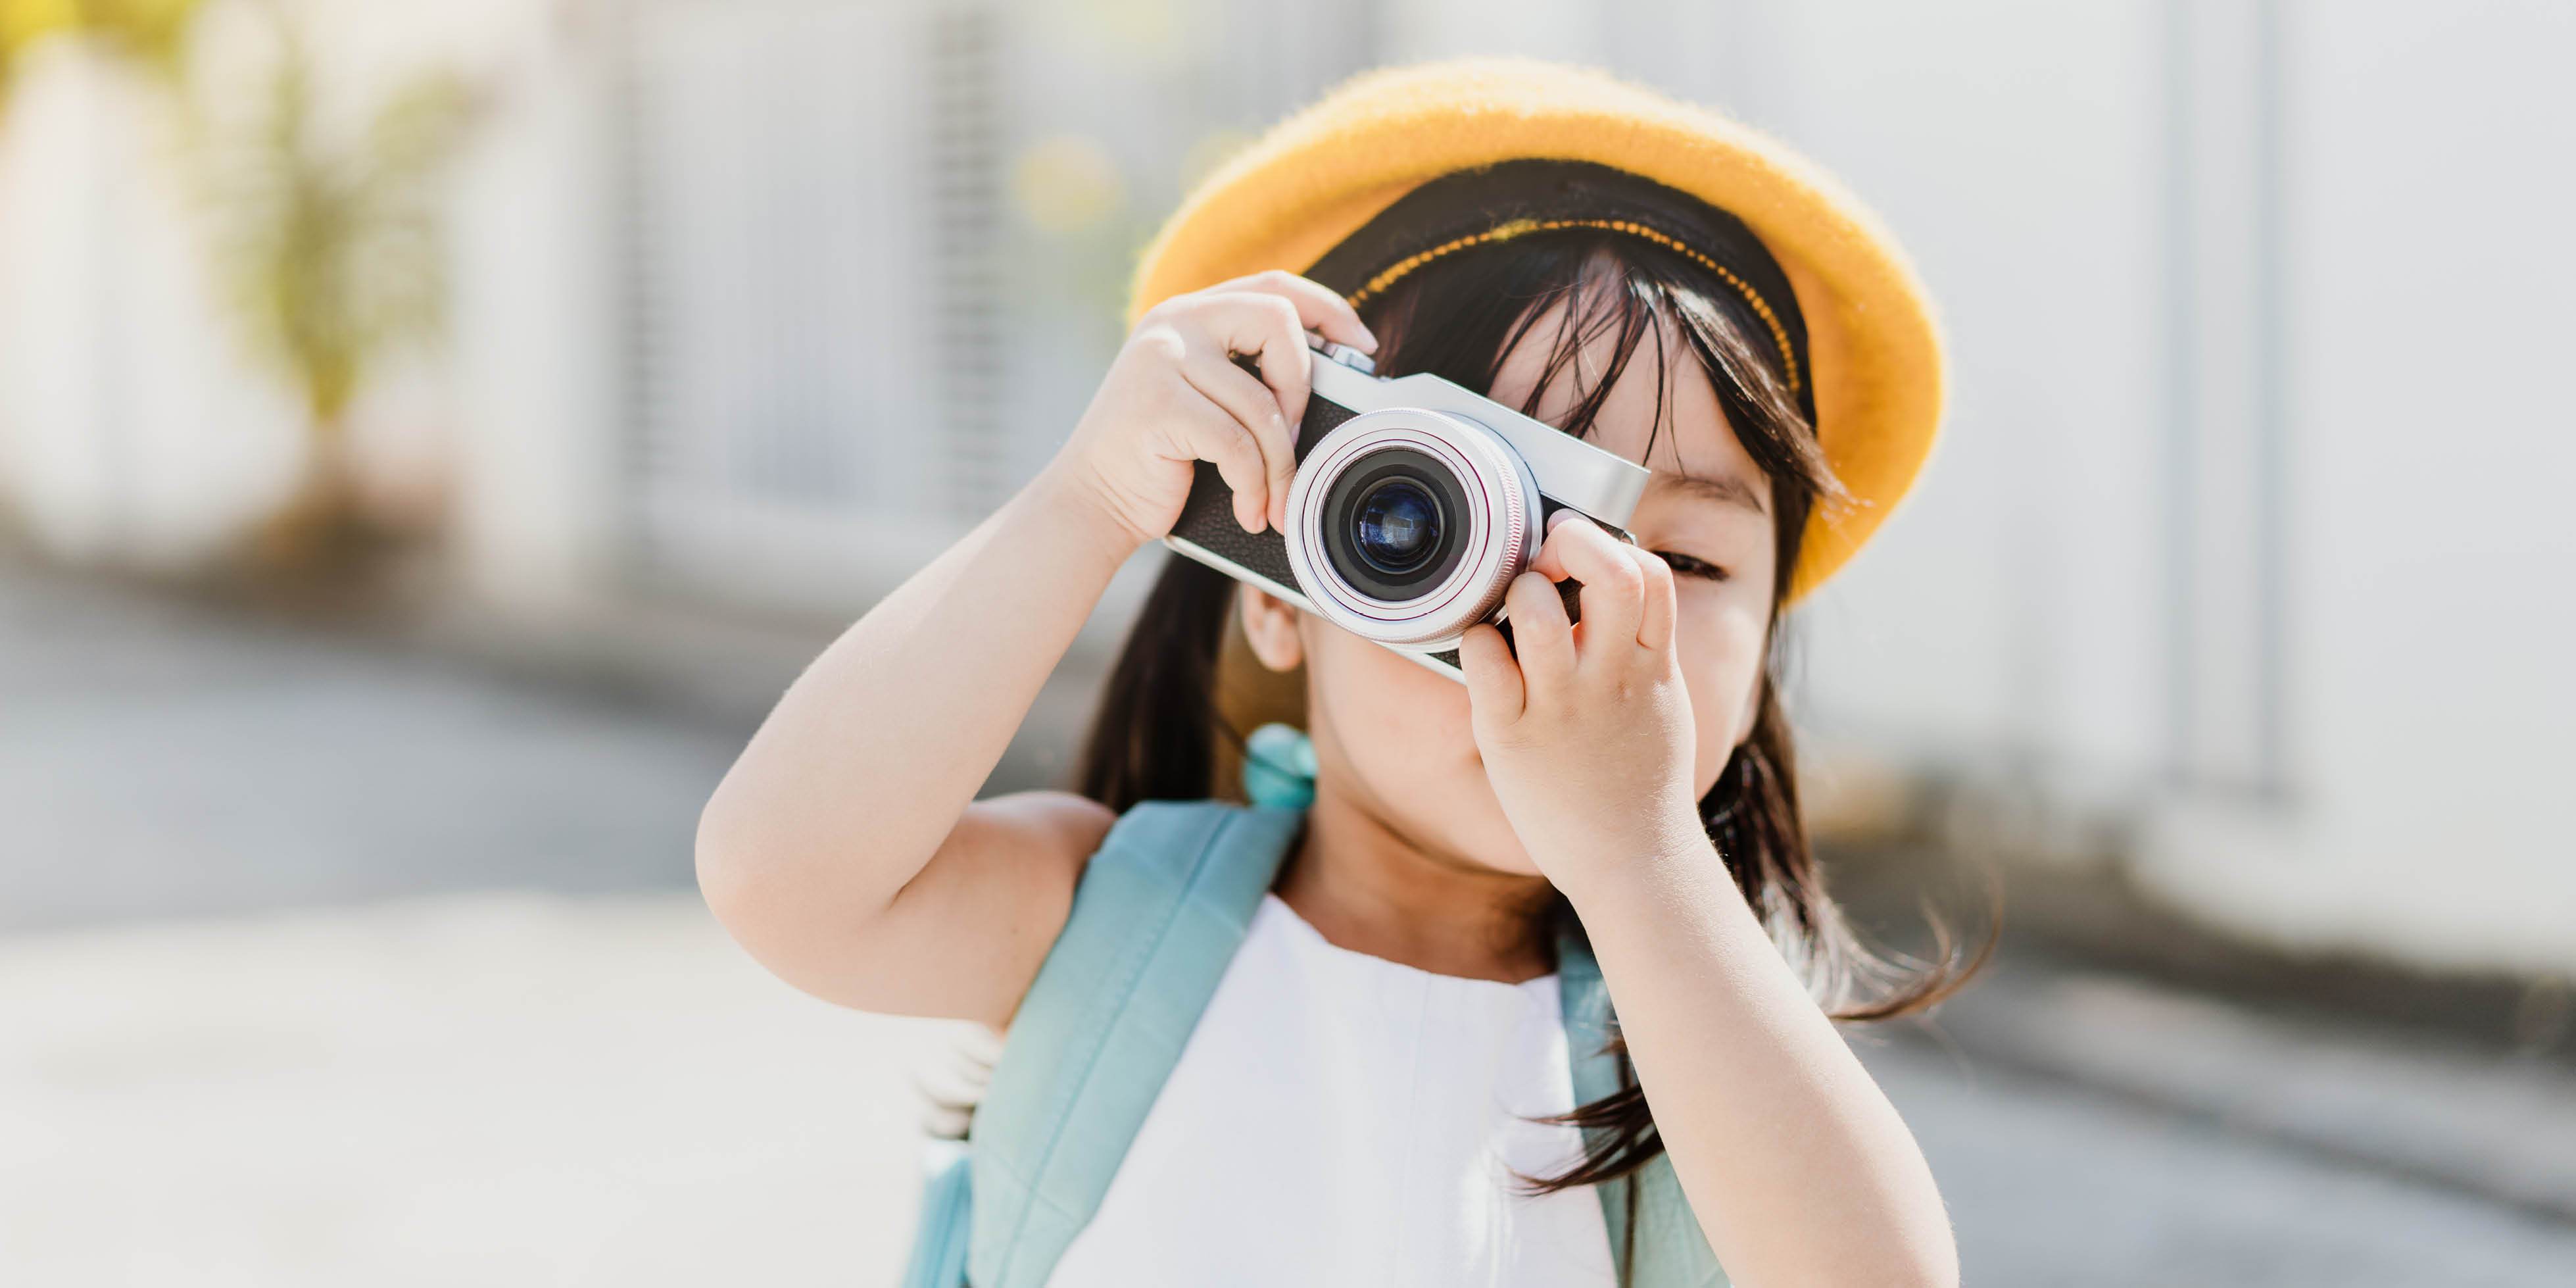 Asian little girl taking photo with camera